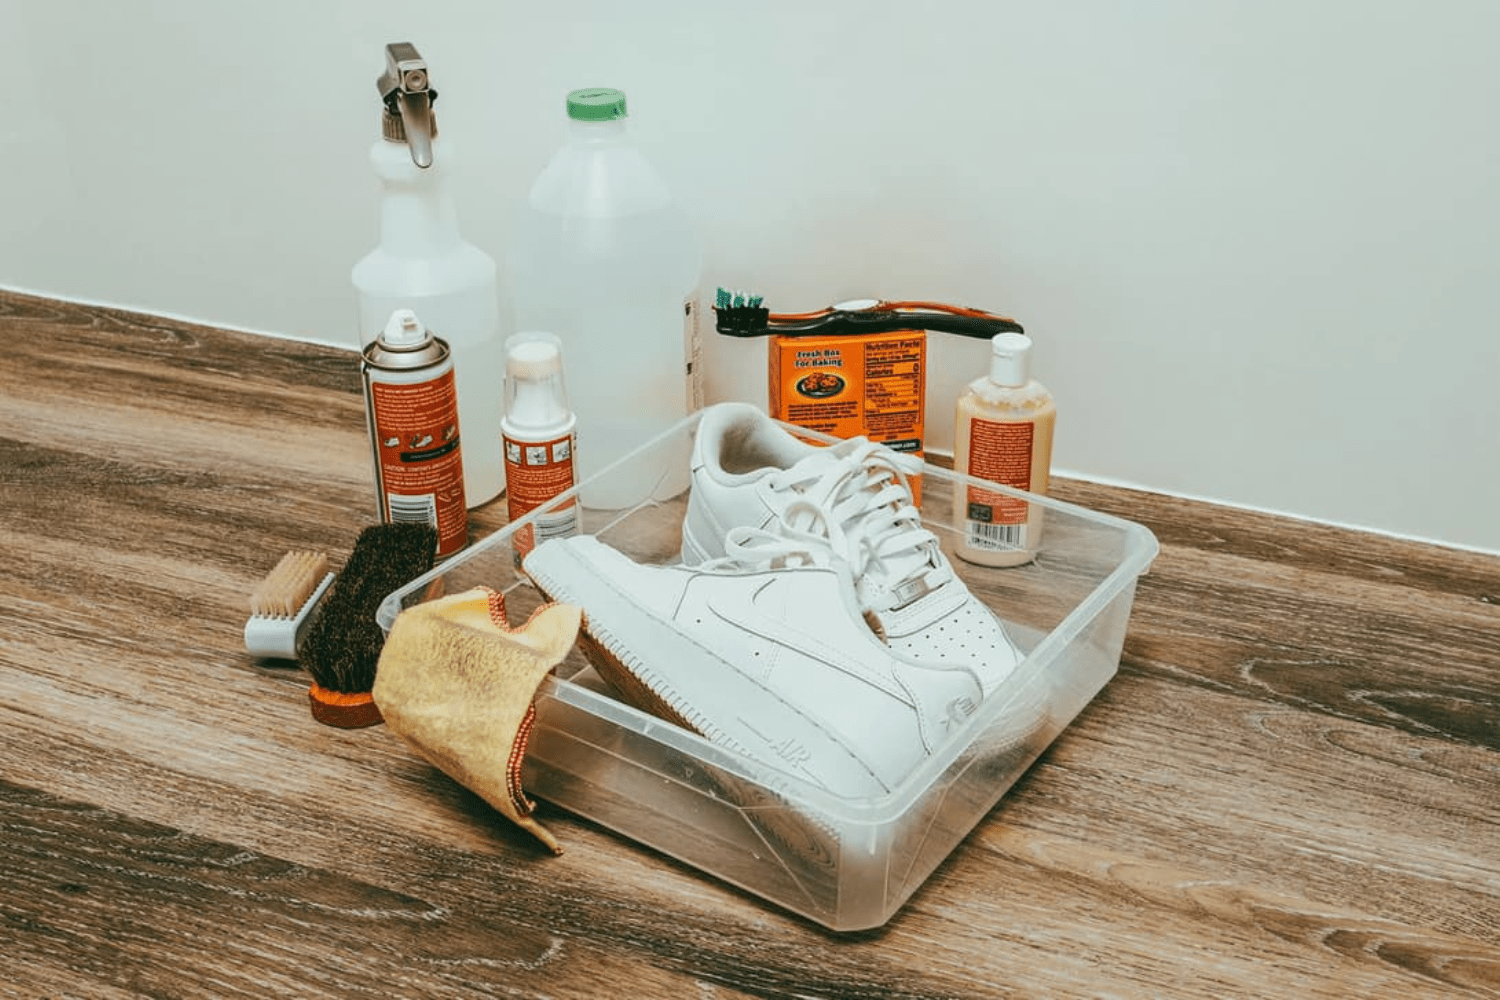 The best products for a sneaker cleaning kit